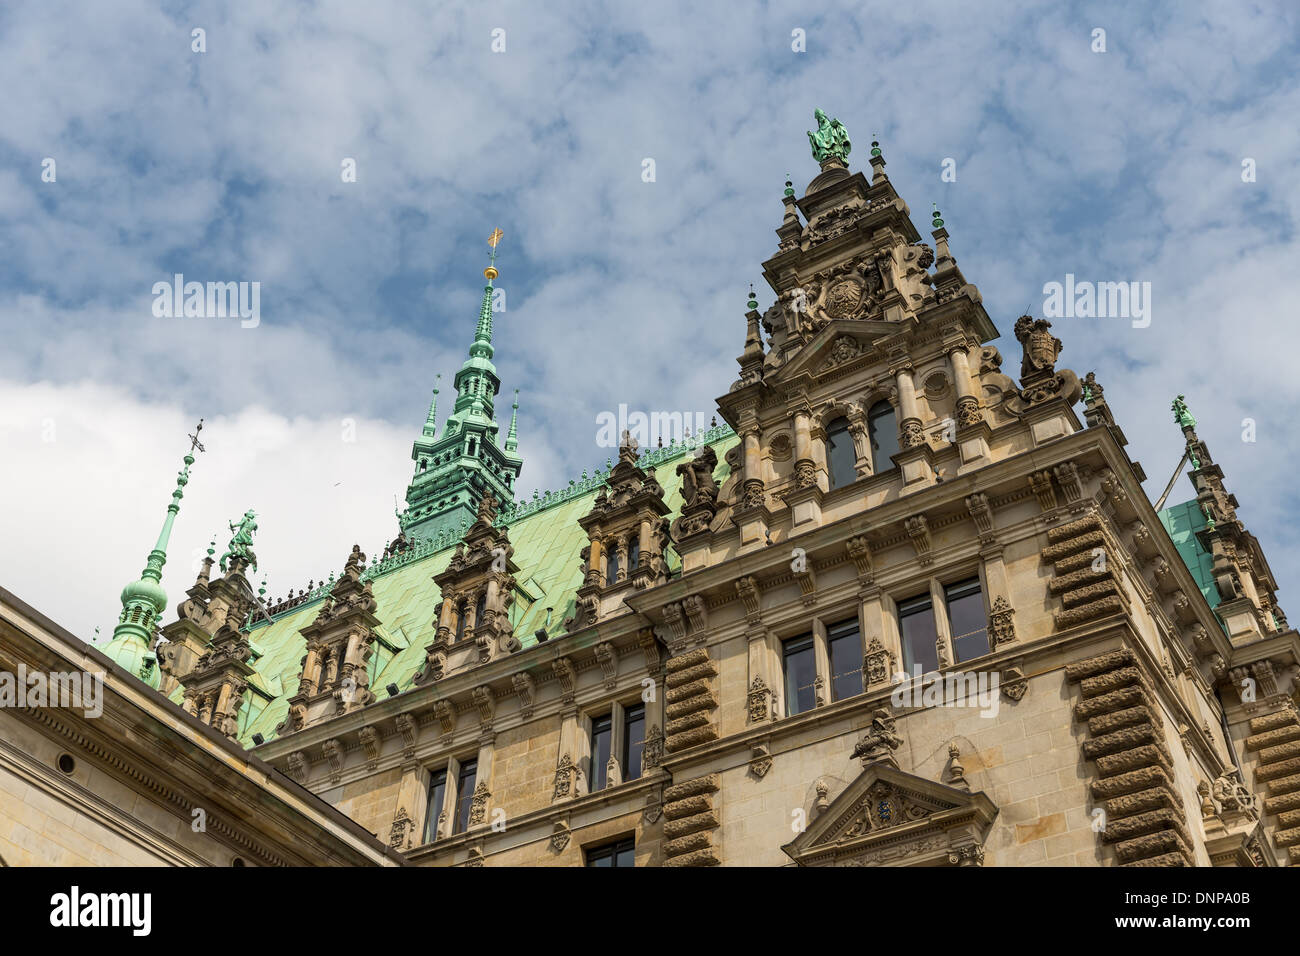 Detail of the facade of the famous Rathaus (City Hall) in Hamburg, Germany Stock Photo